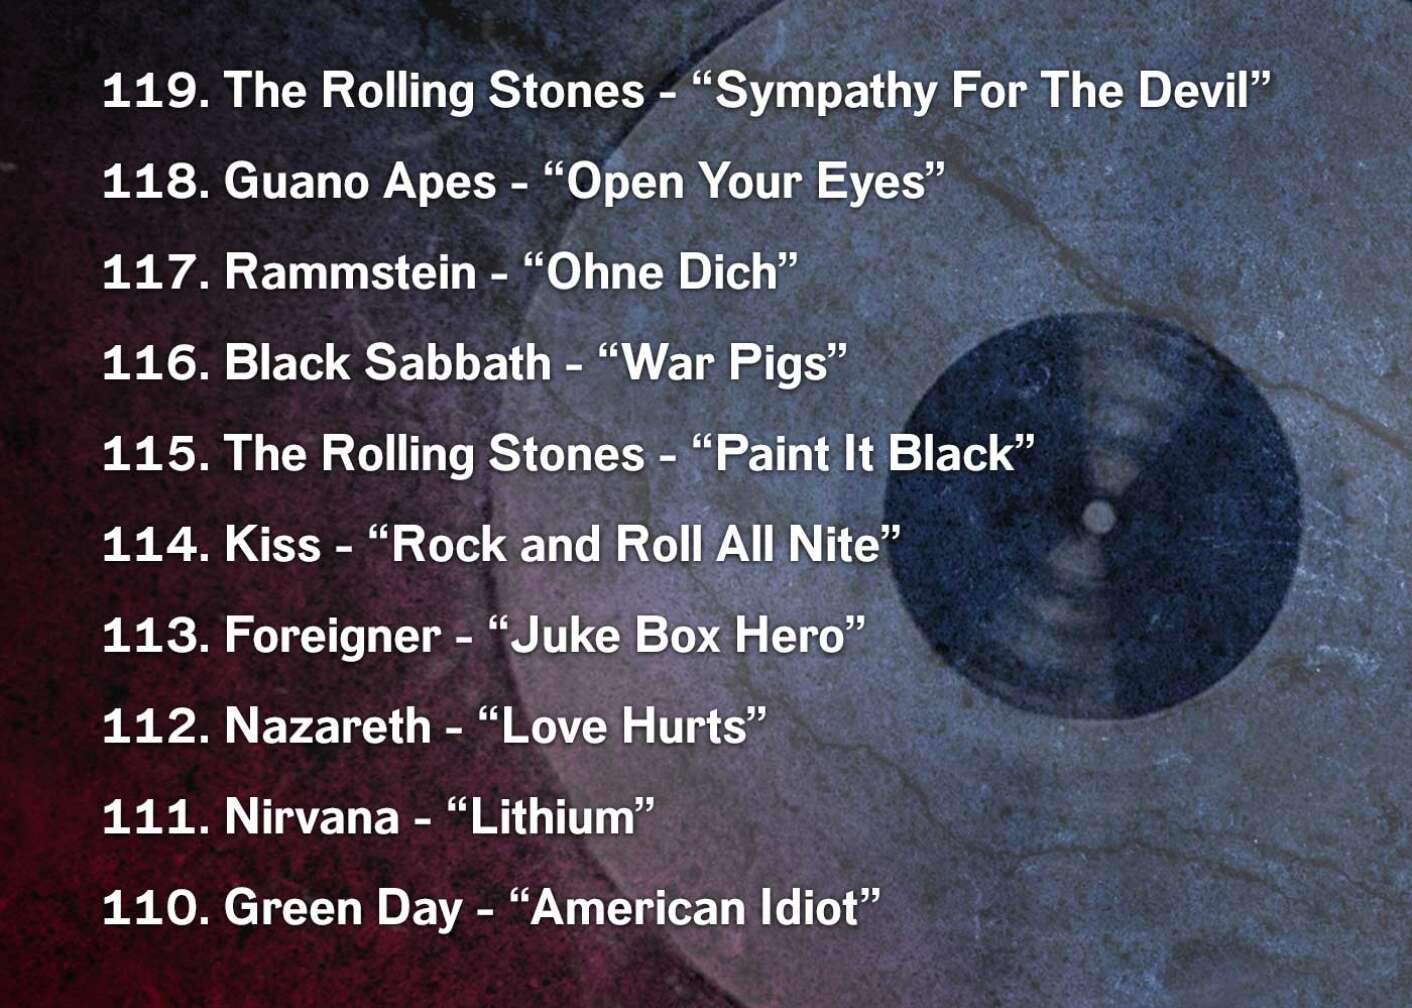 119. The Rolling Stones - “Sympathy For The Devil” 118. Guano Apes - “Open Your Eyes” 117. Rammstein - “Ohne Dich” 116. Black Sabbath - “War Pigs” 115. The Rolling Stones - “Paint It Black” 114. Kiss - “Rock and Roll All Nite” 113. Foreigner - “Juke Box Hero” 112. Nazareth - “Love Hurts” 111. Nirvana - “Lithium” 110. Green Day - “American Idiot”